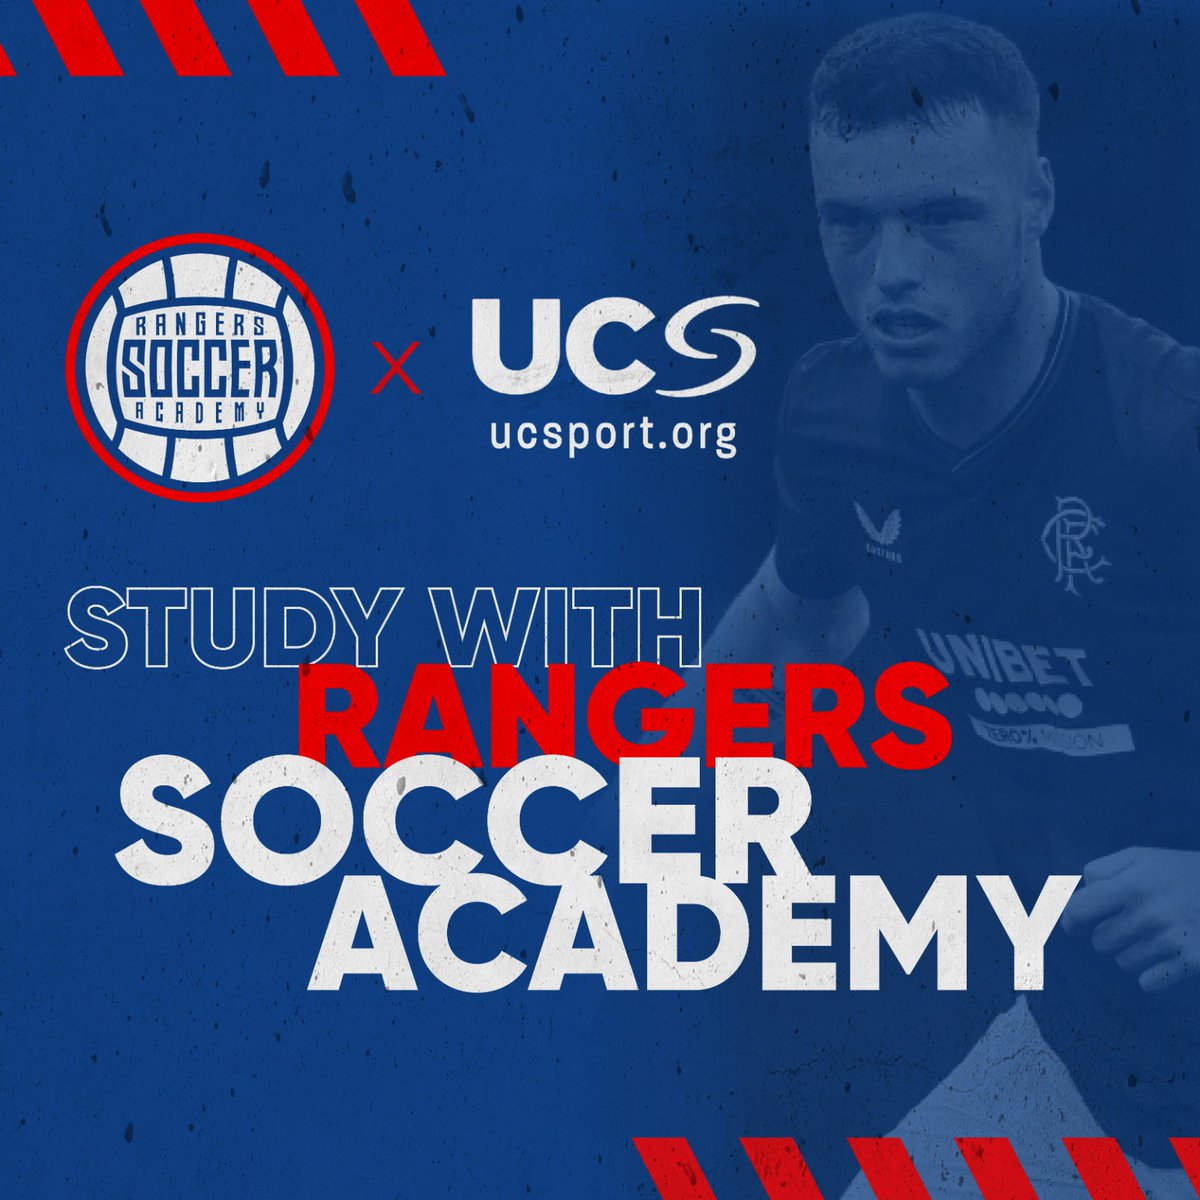 We are delighted to now accept applications from 𝗡𝗼𝗿𝘁𝗵𝗲𝗿𝗻 𝗜𝗿𝗲𝗹𝗮𝗻𝗱 to join the Rangers Soccer Academy BSc Sport & Fitness programme, in partnership with @oneucsport 📚⚽ Register your interest now shorturl.at/auDHU Find Out More - shorturl.at/frzJQ